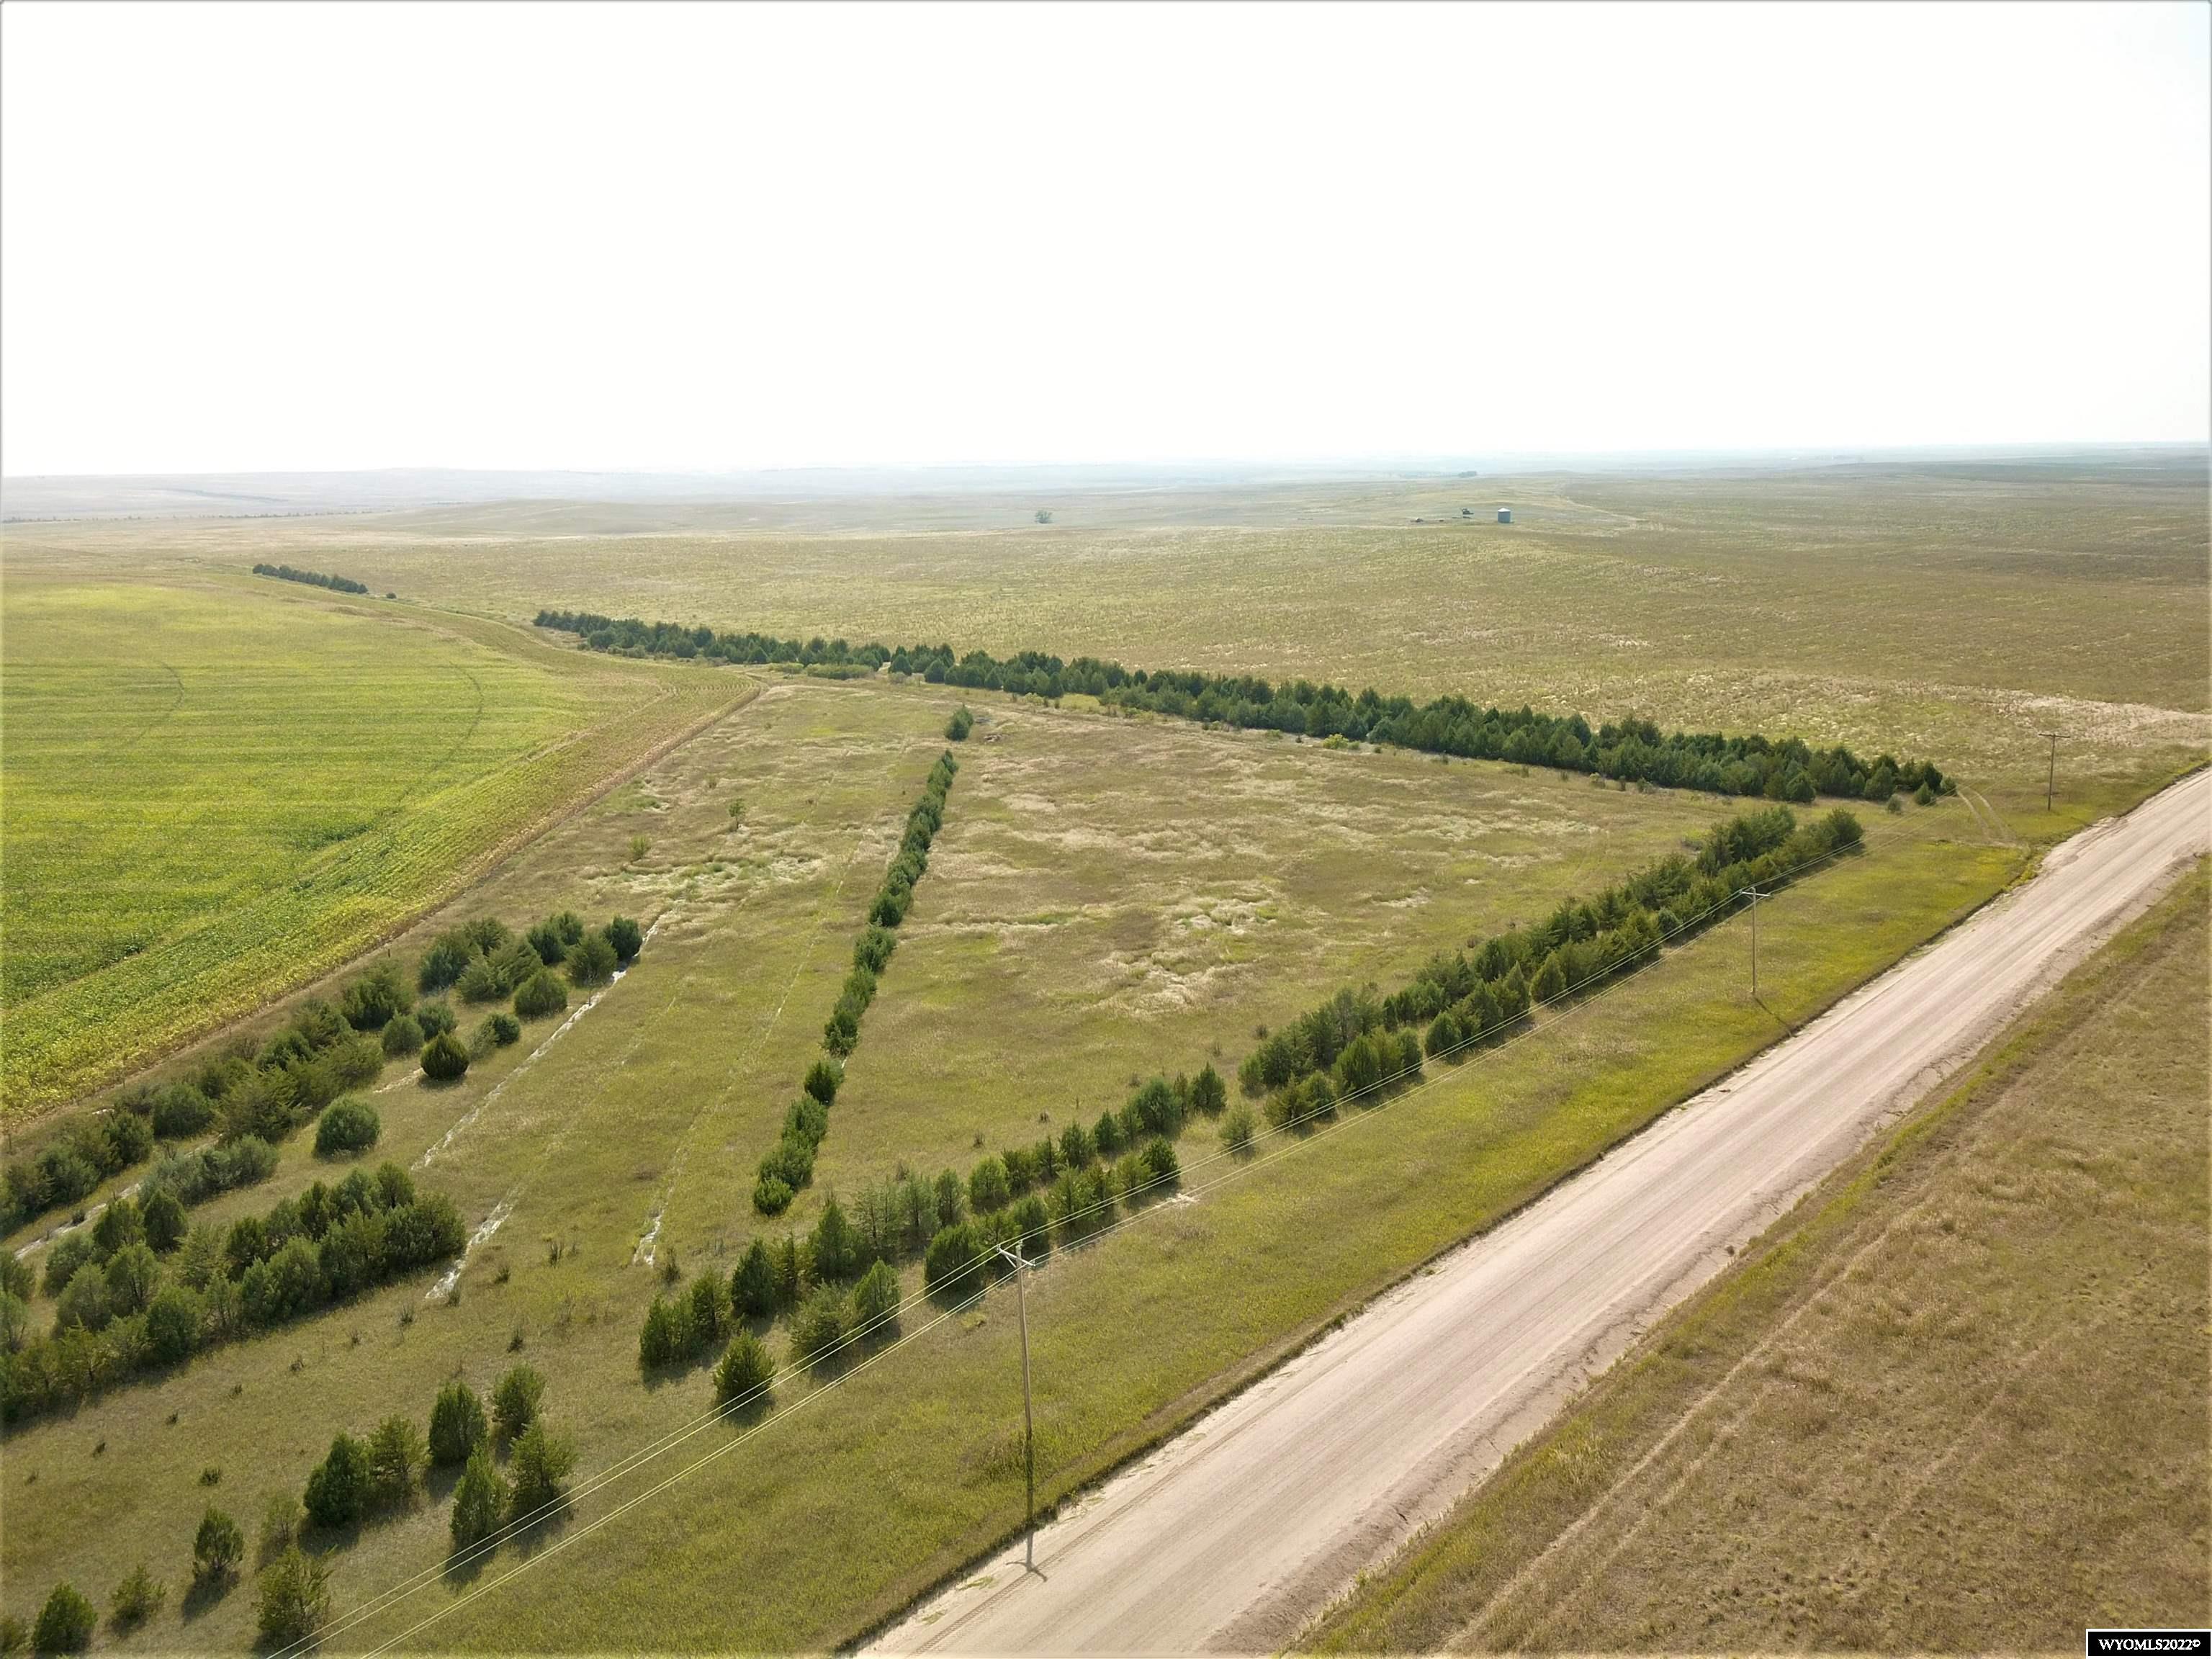 These 14+/- acre lots are heavily treed and provide plenty of room for all of your furry friends without needing a full-time maintenance worker! Located just 10 miles North of the quaint town of Kimball, NE and 41 miles from Scottsbluff, NE you will have all the amenities you desire while having privacy and room to roam.